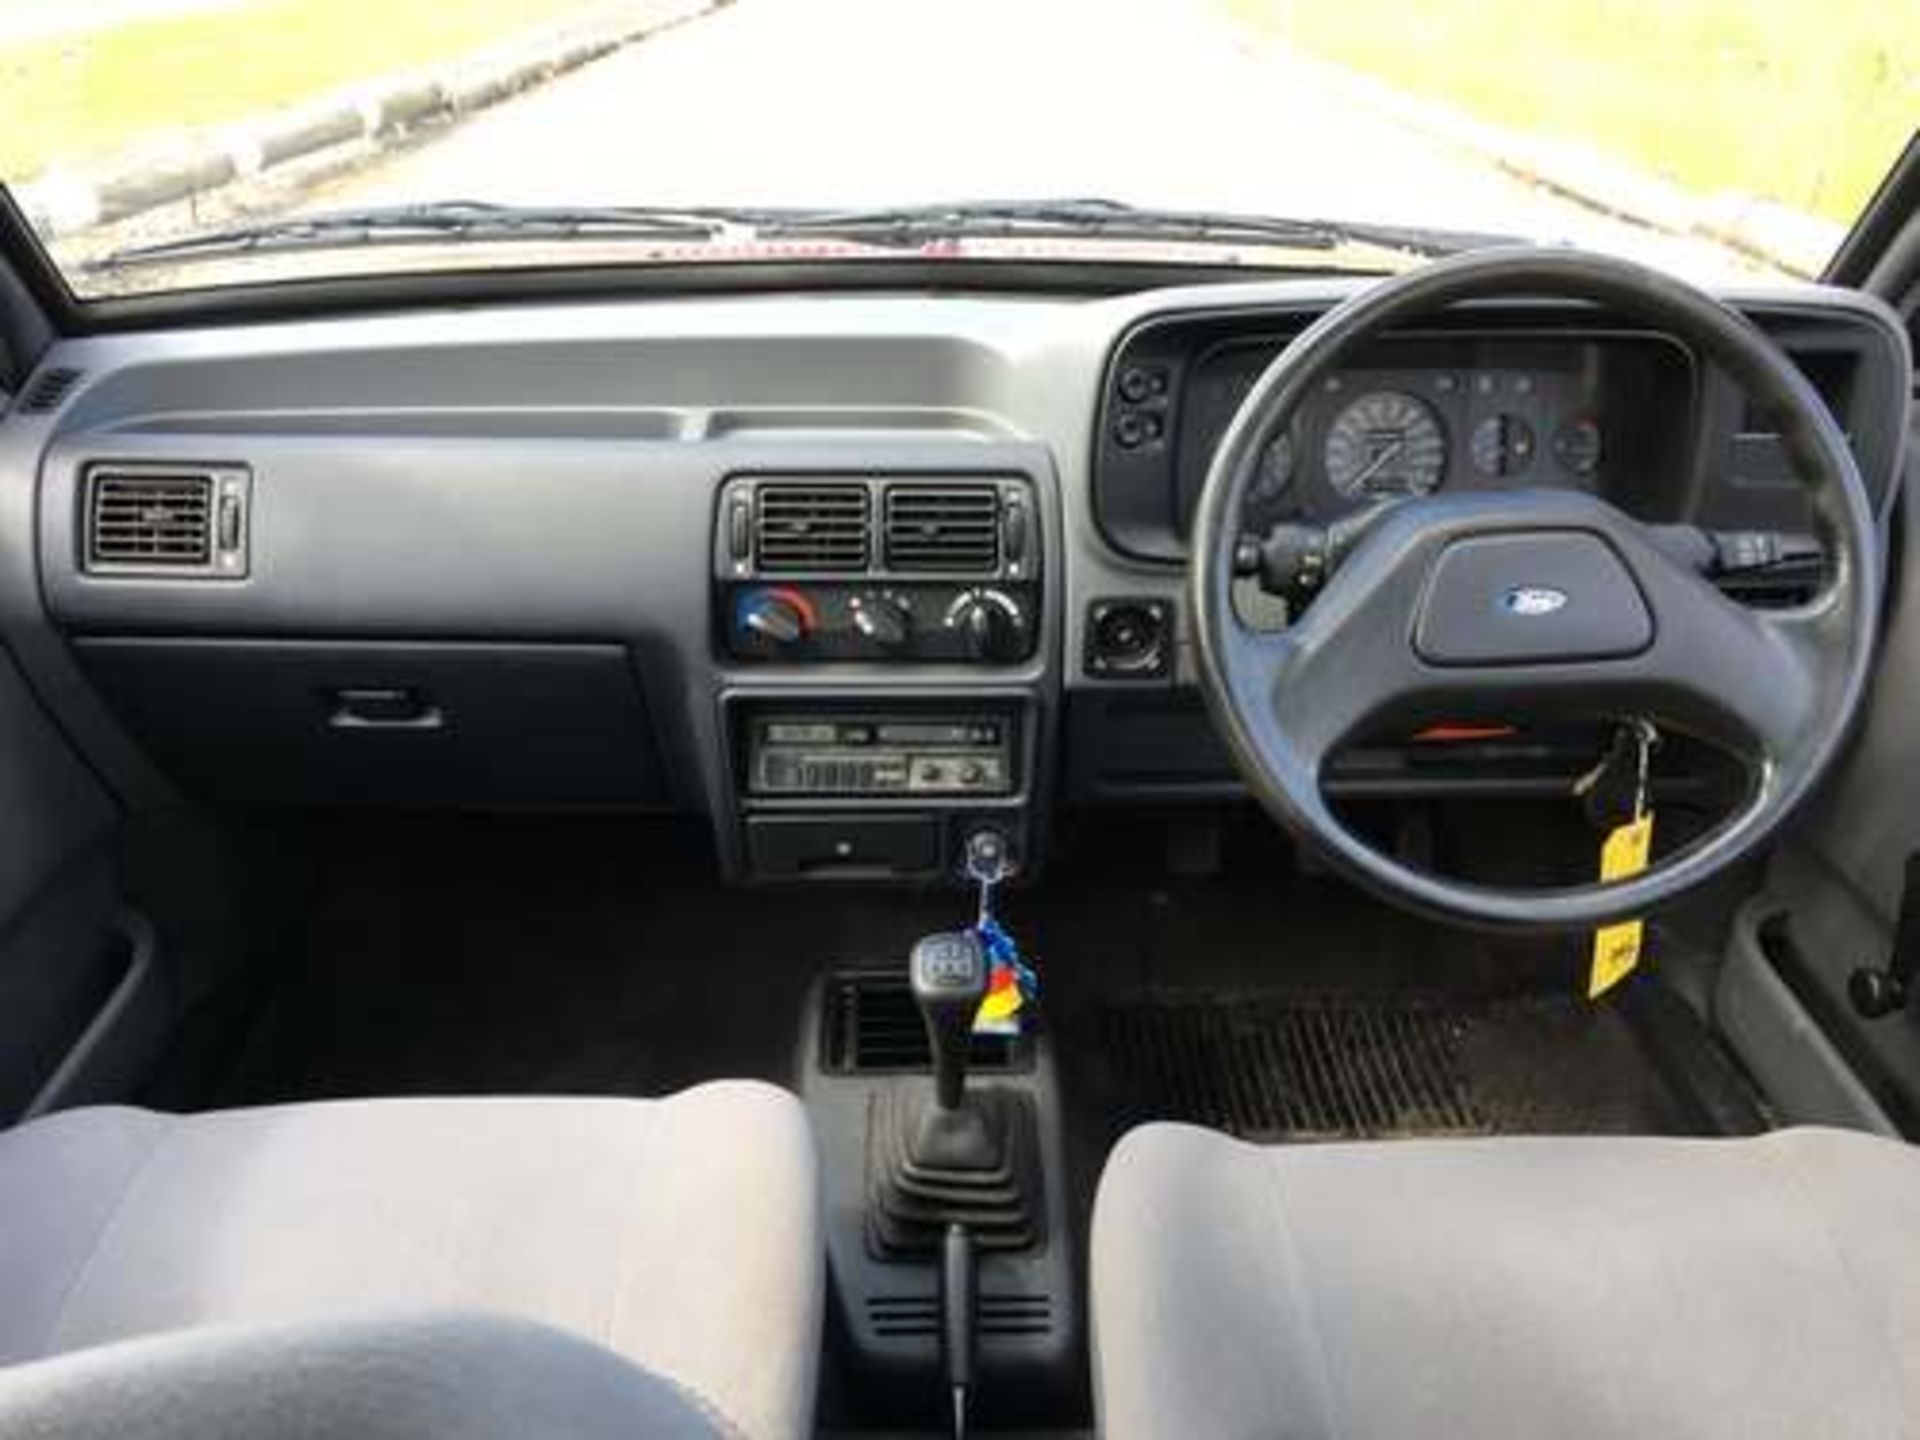 FORD ORION L - 1596cc - Image 13 of 18